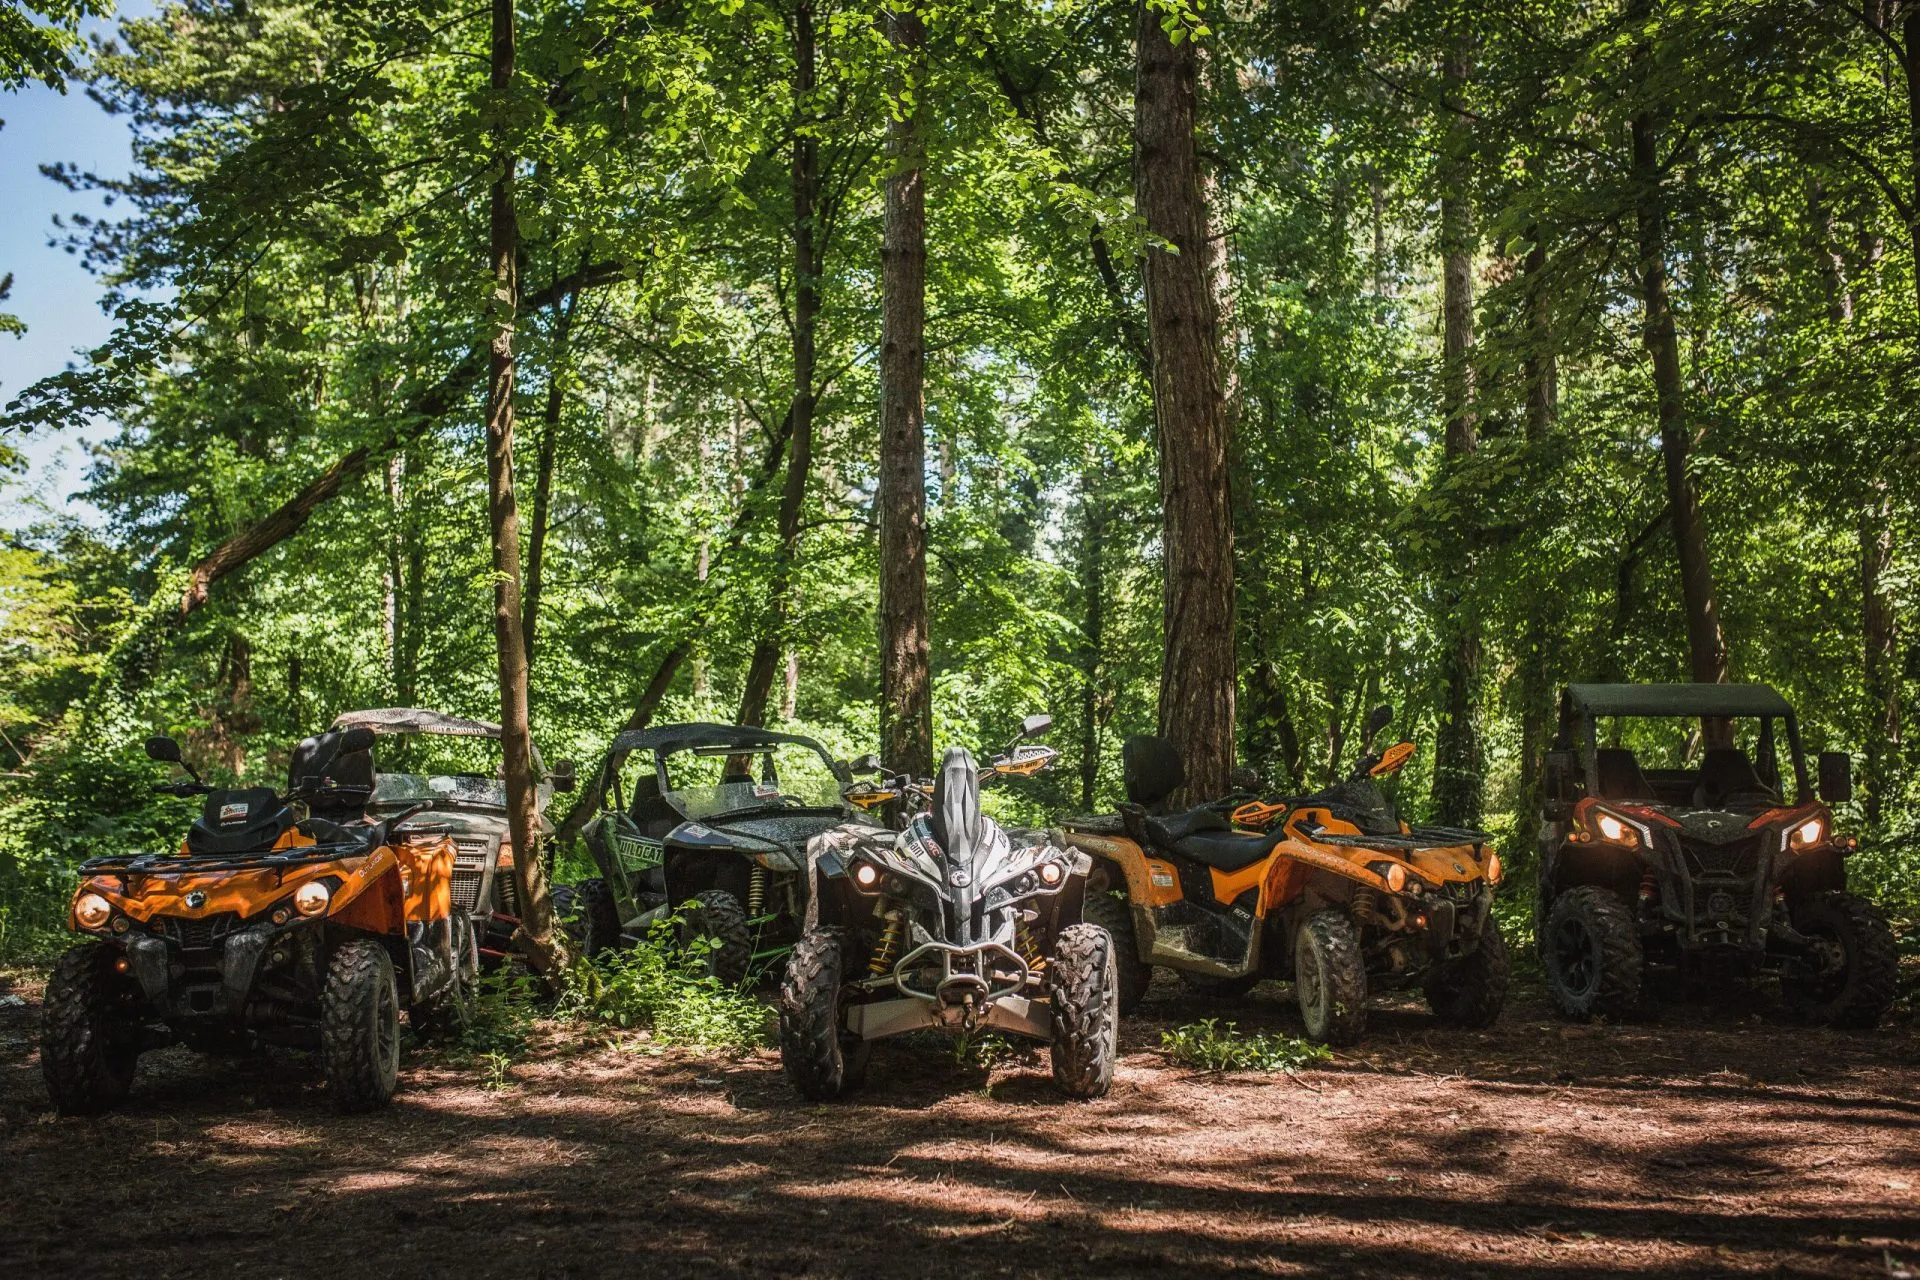 Exploring the woods on quads